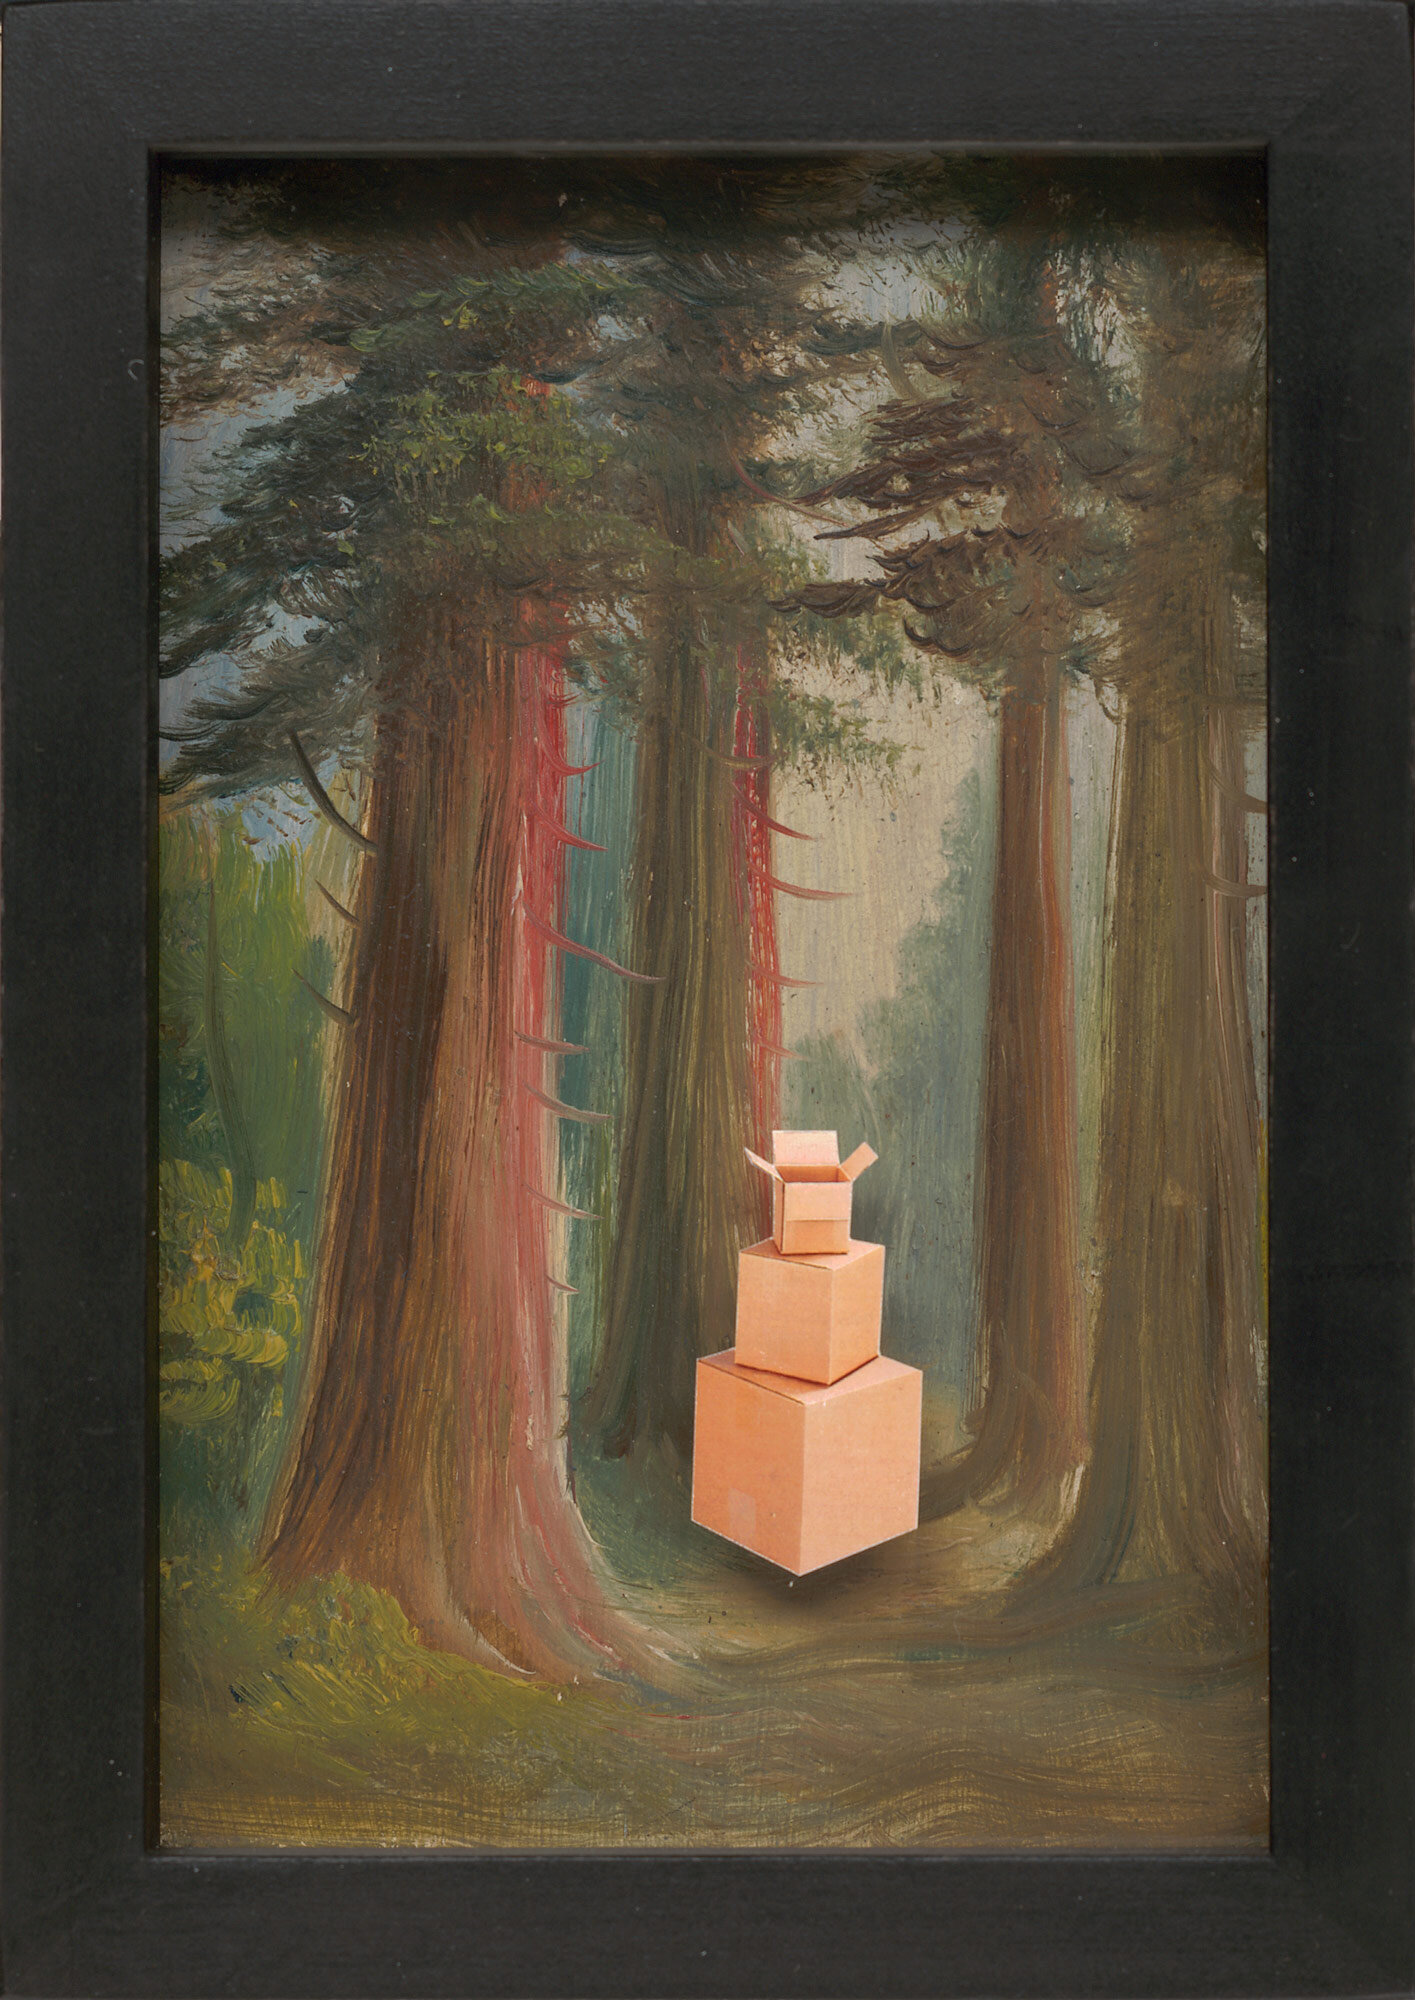    Untitled (Forest, Boxes)   2009, found painting and printed matter, glass 8” x 10” 